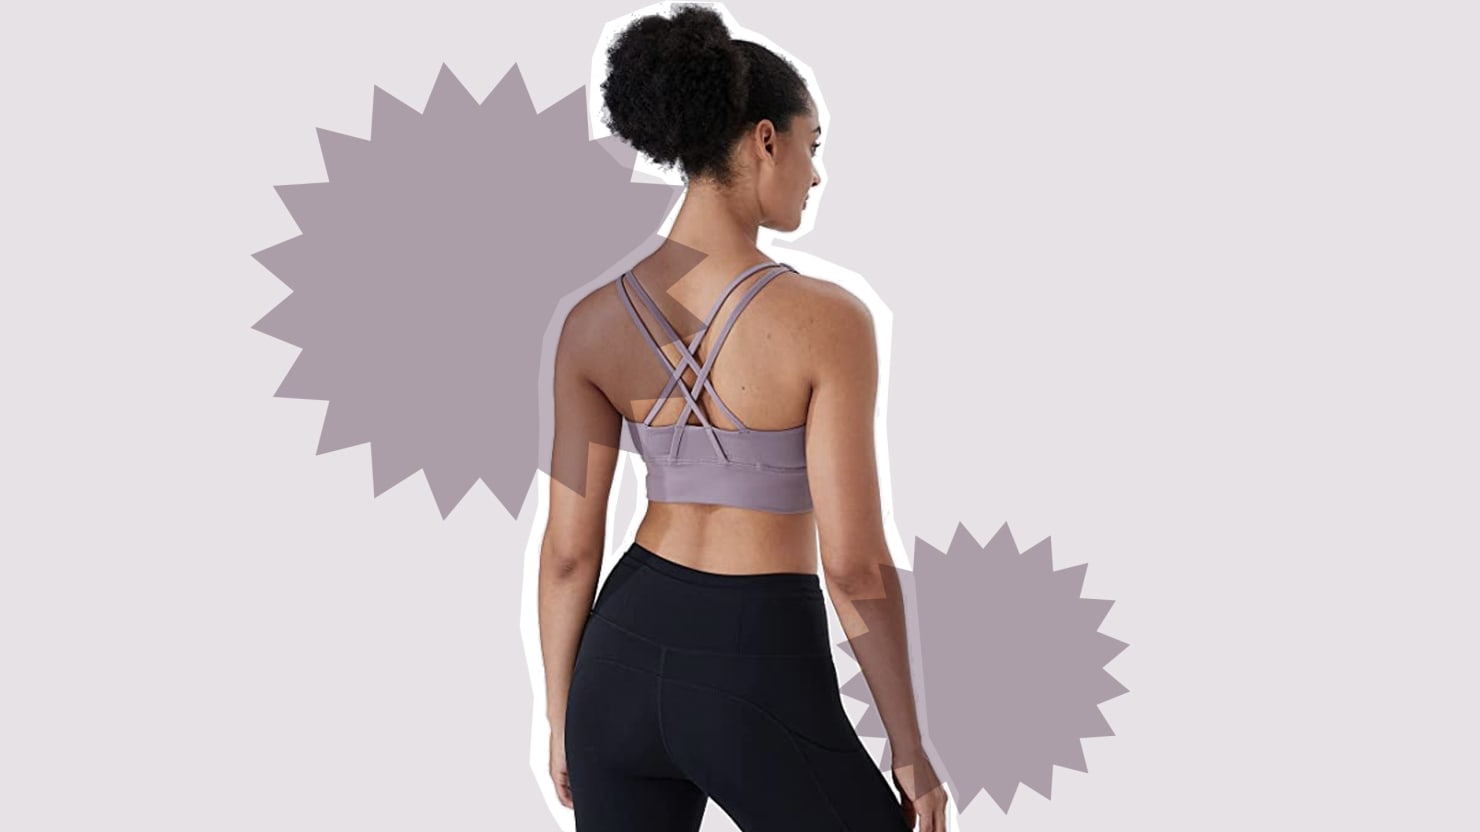 Best long line energy bra dupe on , CRZ yoga long line bra. These run  small, I'm wearing a size large. Could have maybe got away with ordering a  medium. I a